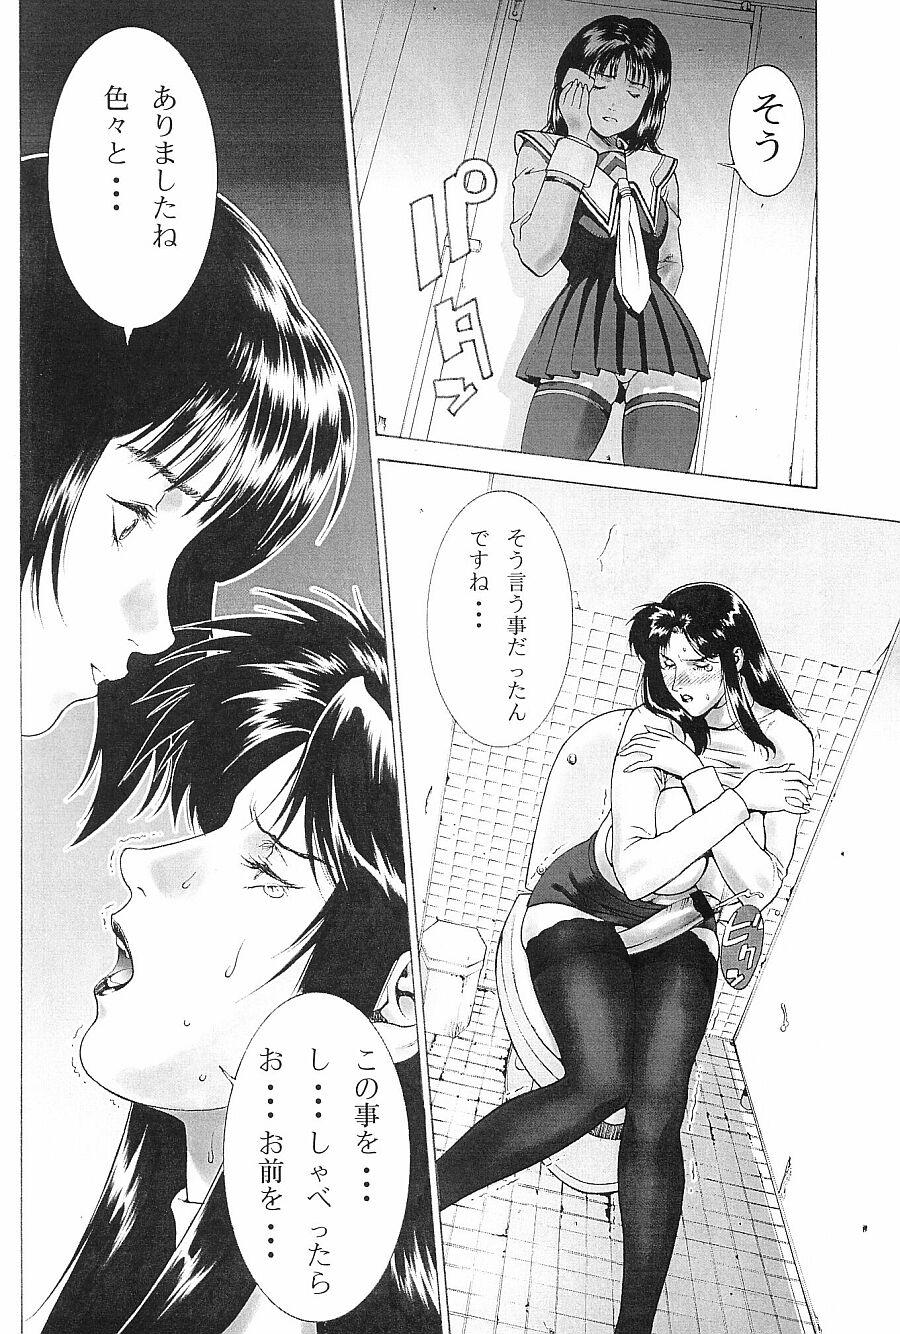 Uncut Crazy-D Act 06 - Is Gundam 0083 Doggy Style Porn - Page 10